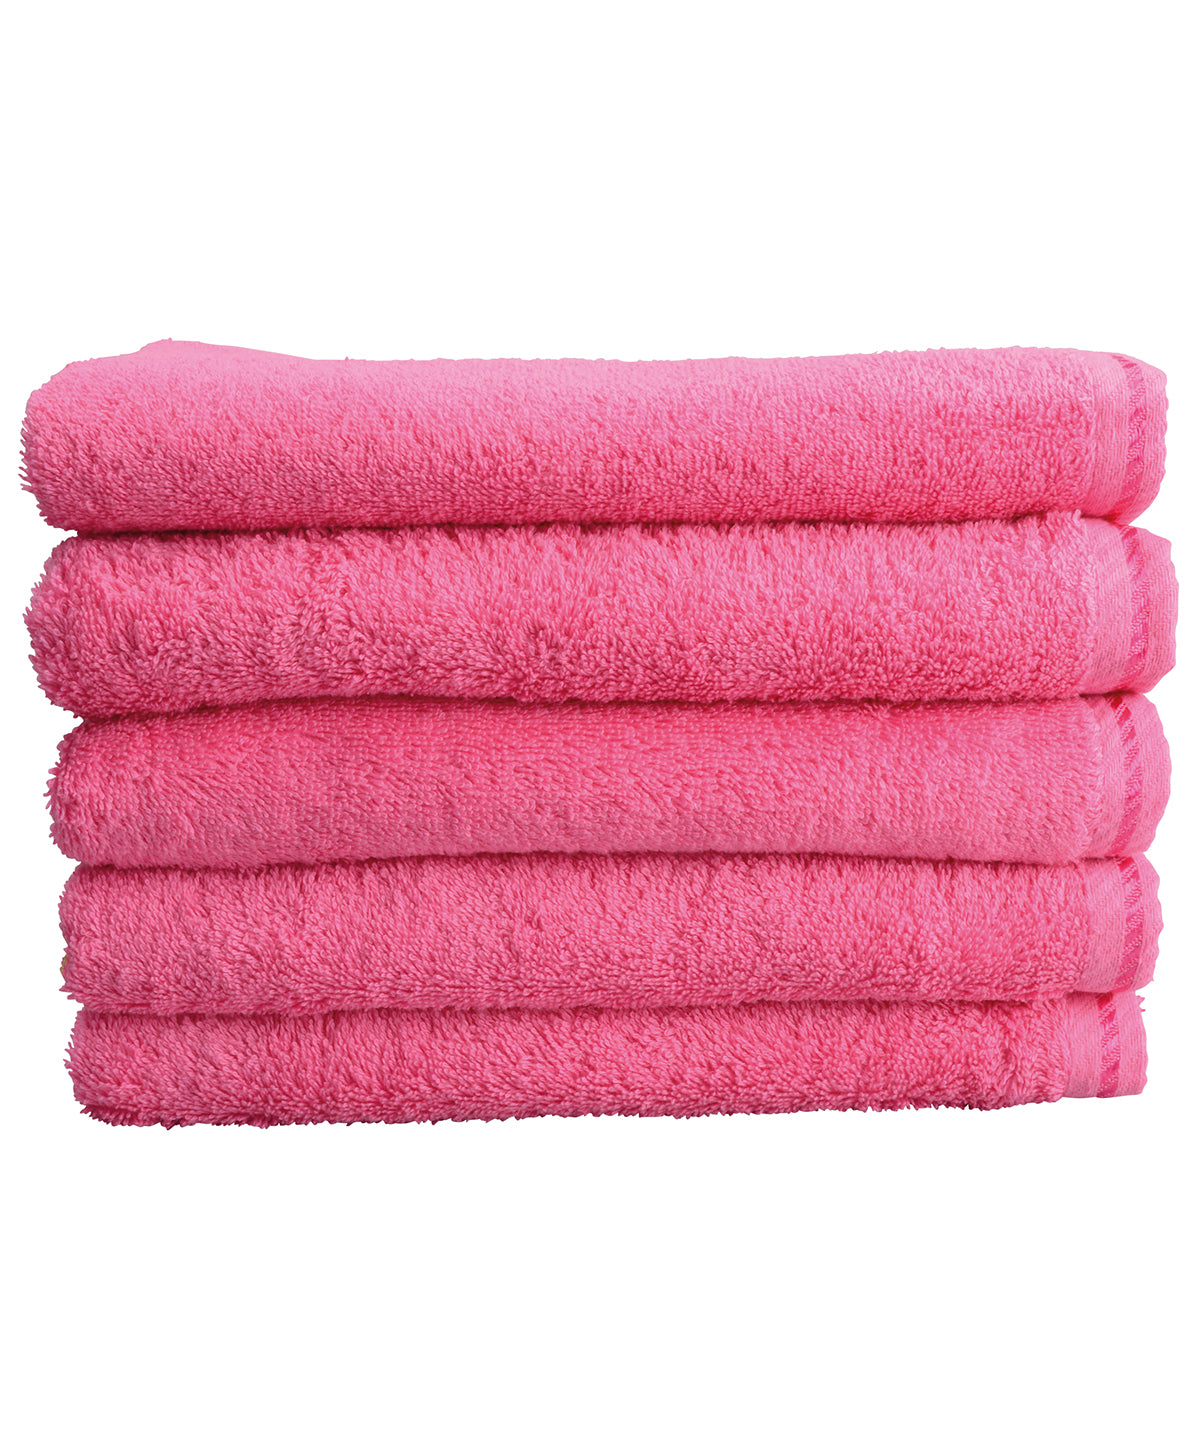 Personalised Towels - Mid Pink A&R Towels ARTG® Hand towel